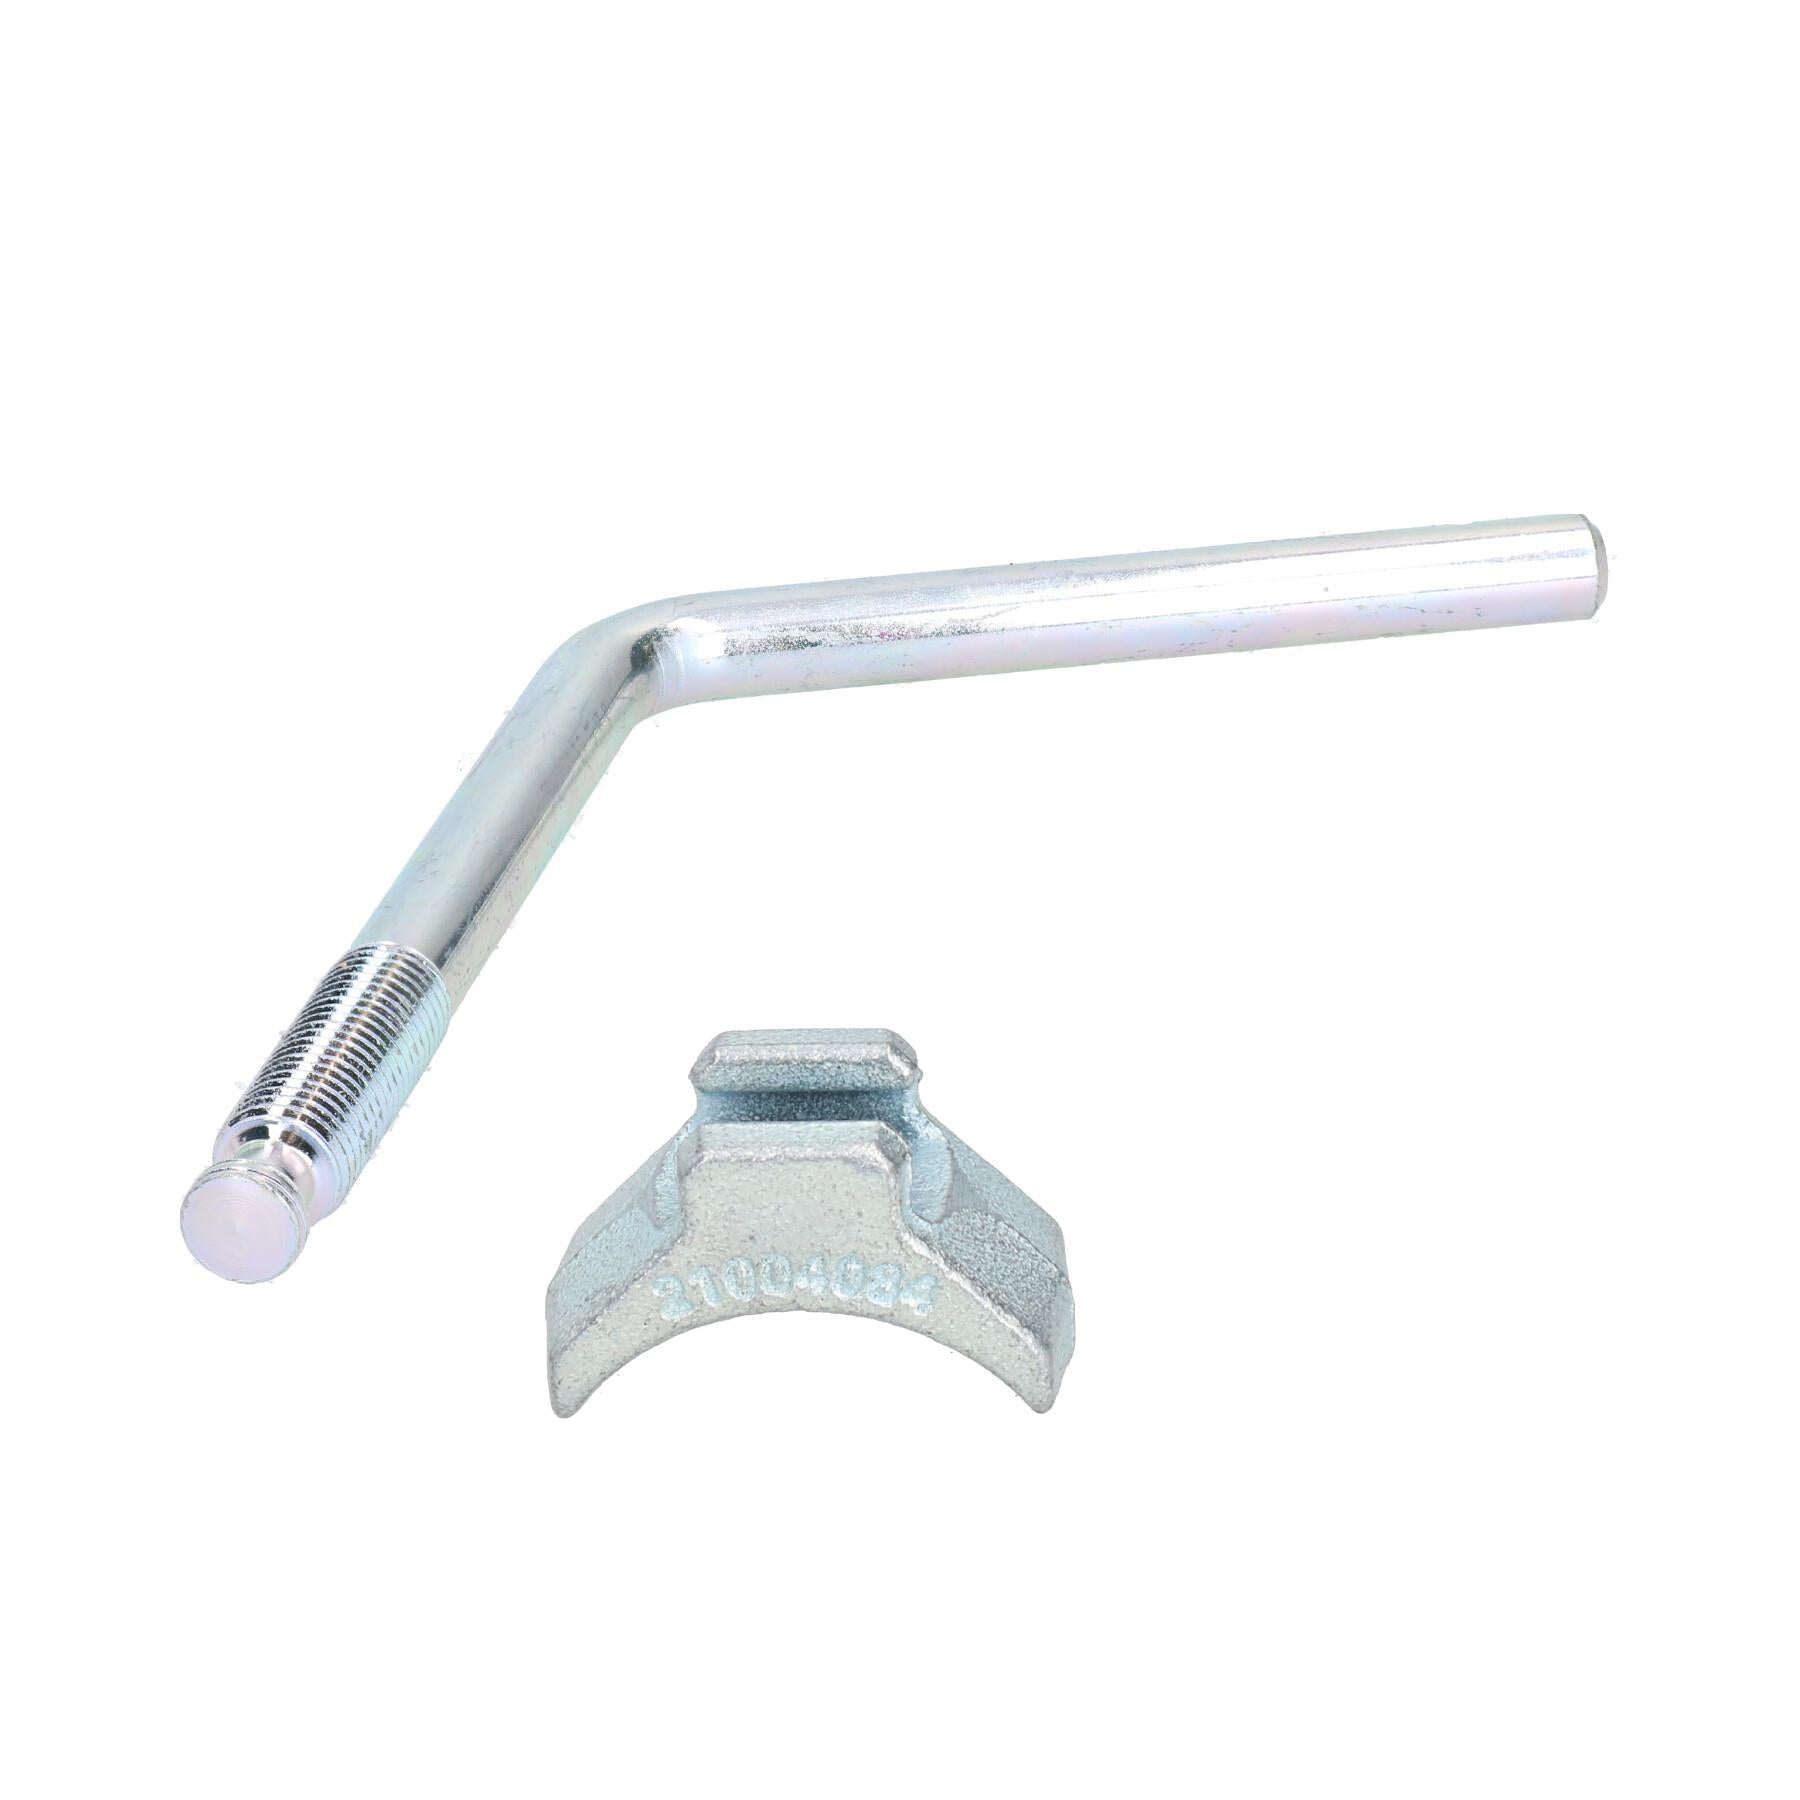 Long Jockey Wheel Clamp Handle & Pad for Knott Couplings to fit Ifor Williams Trailer